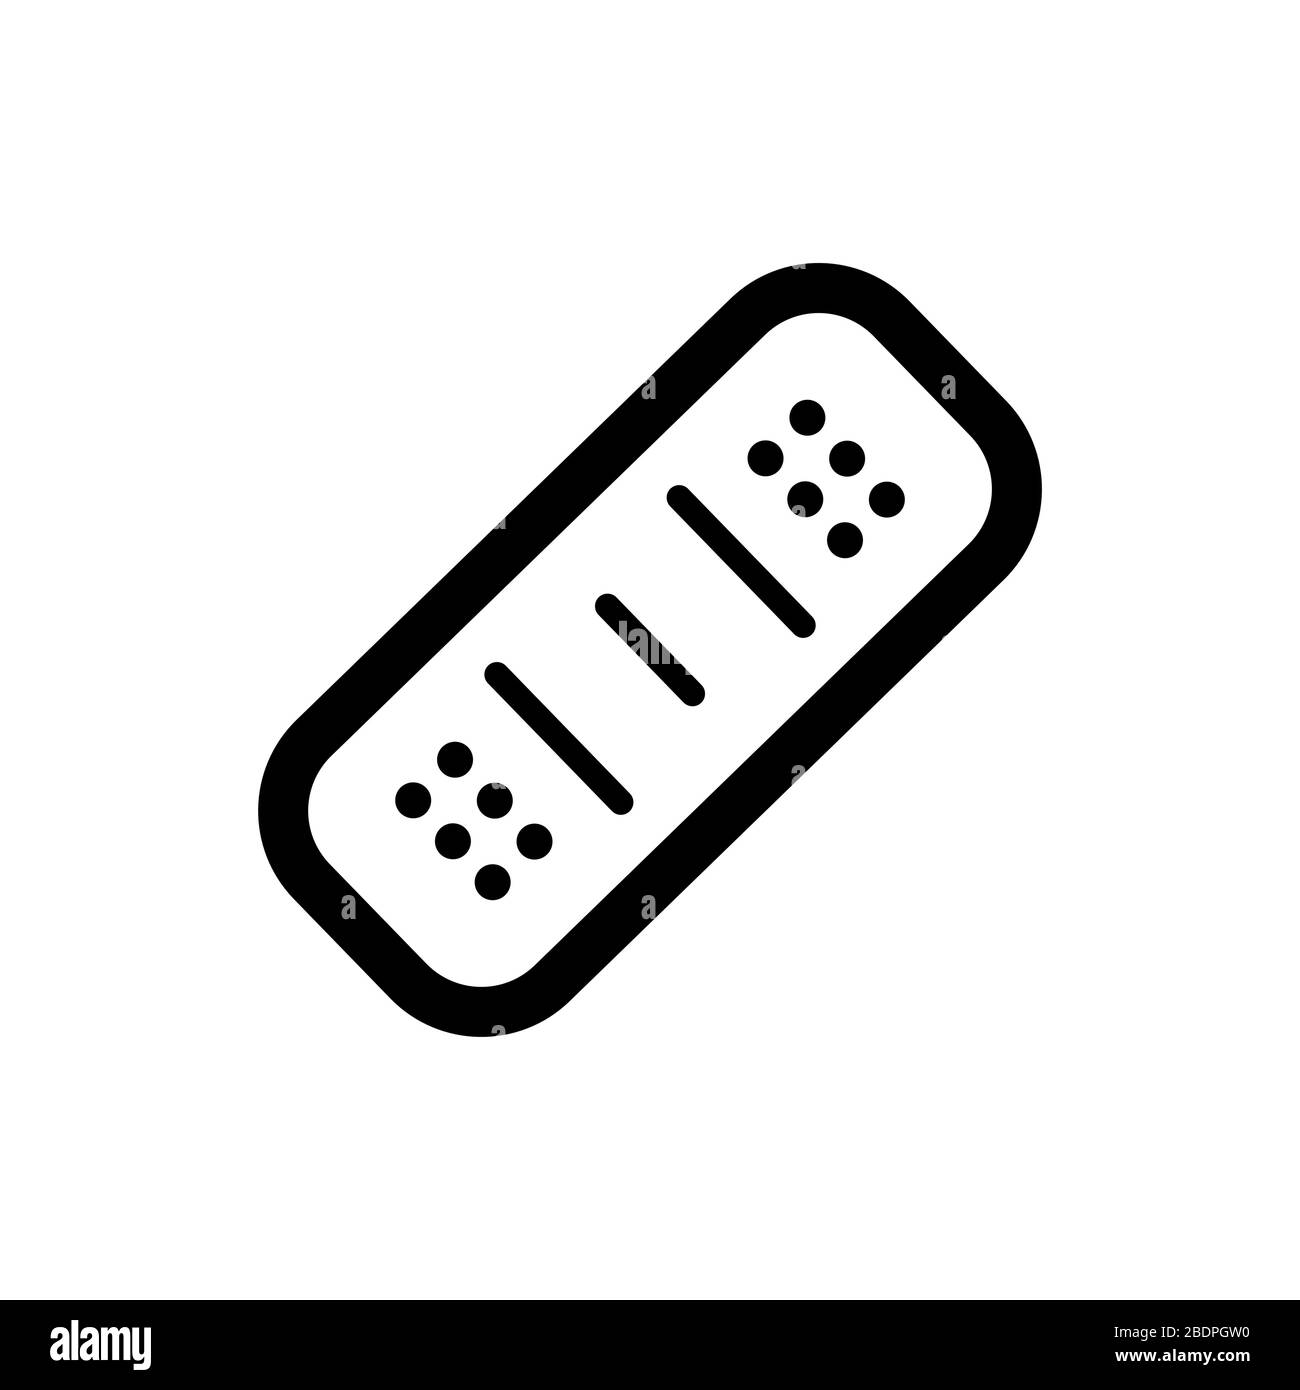 Band aid icon. Black icon isolated on white background. Medical patch silhouette. Simple icon. Web site page and mobile app design vector element. Stock Vector